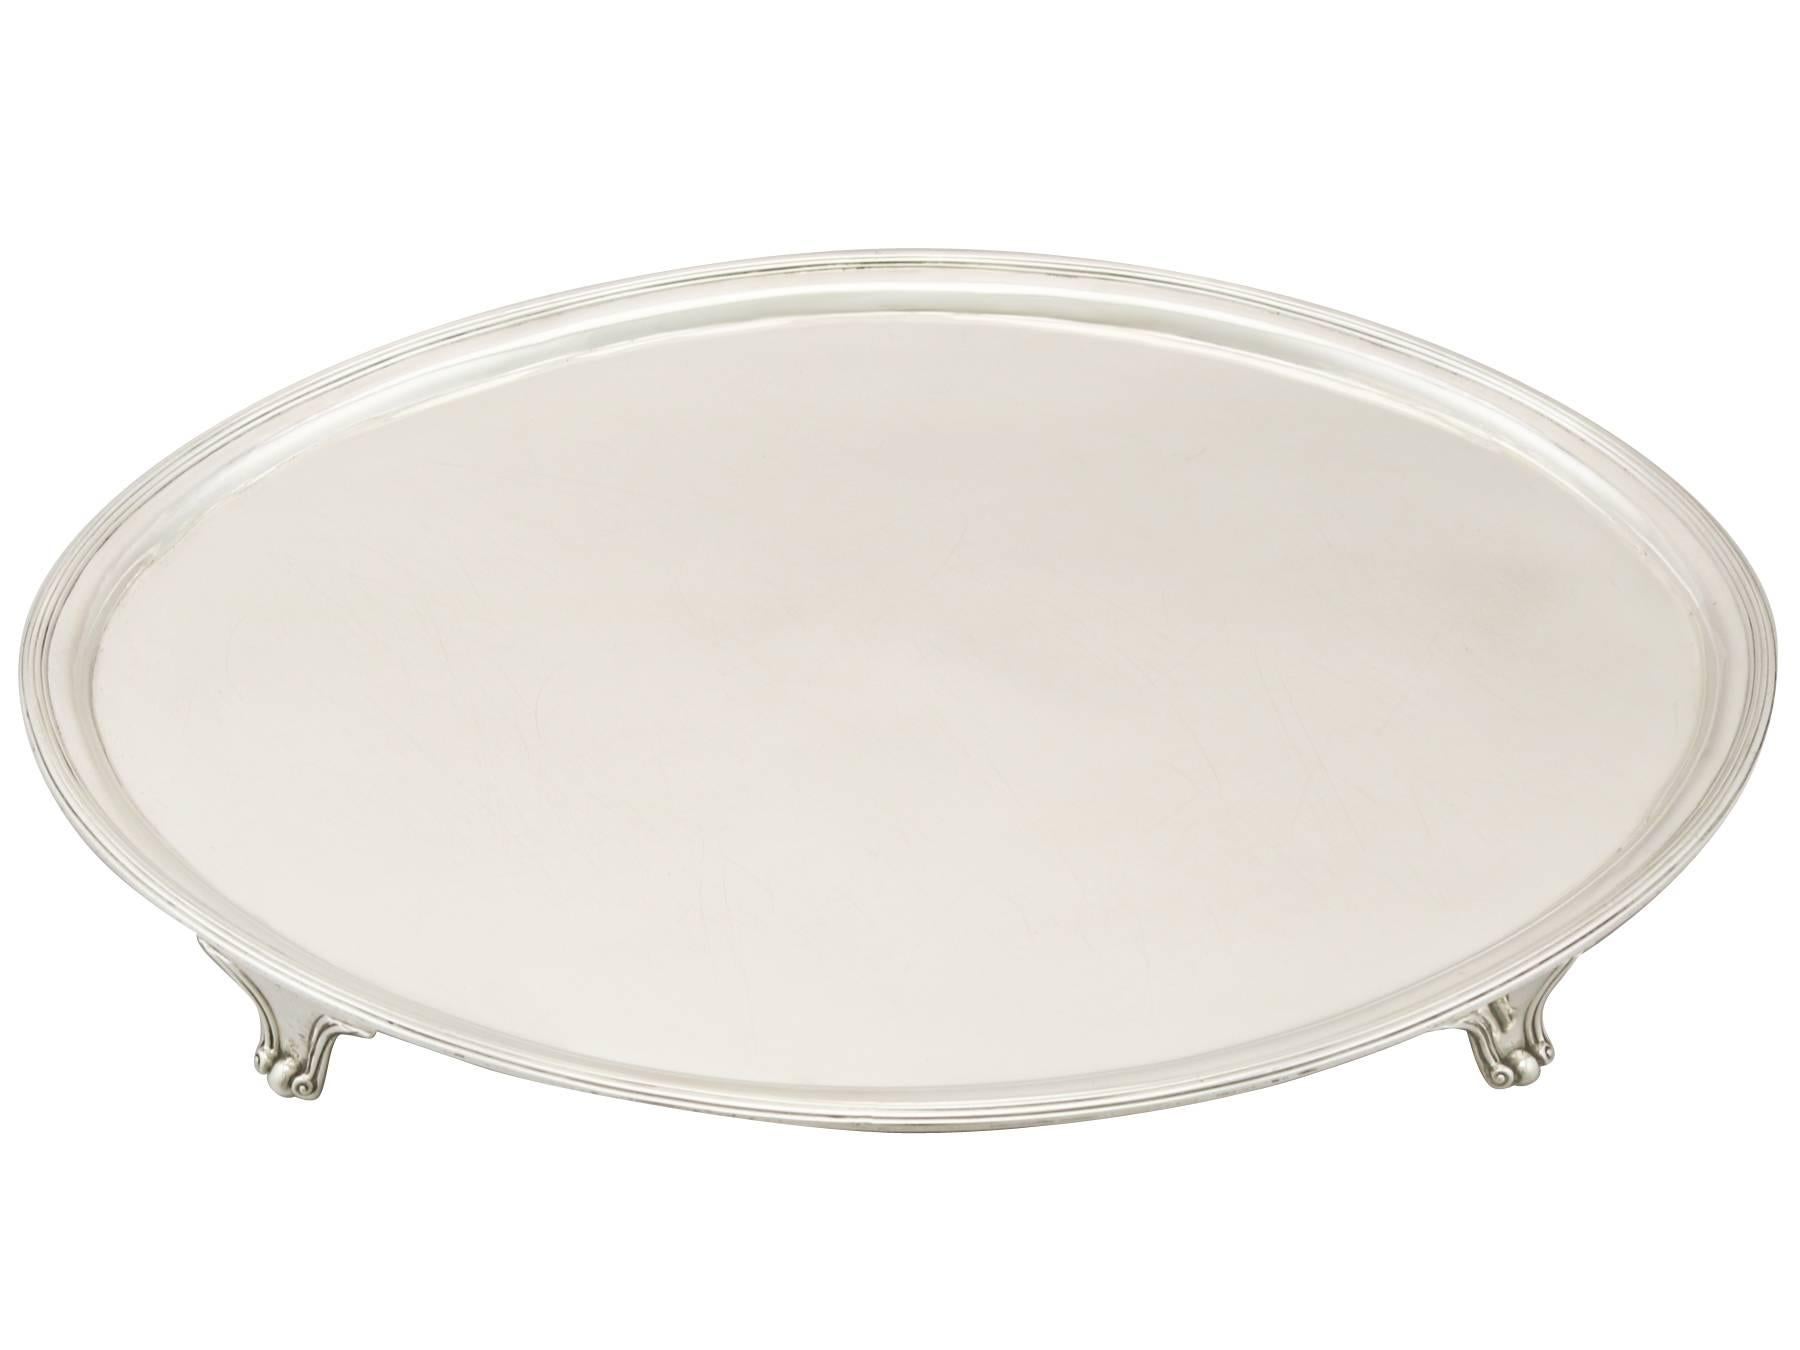 A fine and impressive, large antique George III English sterling silver salver; an addition to our Georgian silverware collection

This impressive antique George III sterling silver salver has a plain oval form onto four bracket style feet.

The